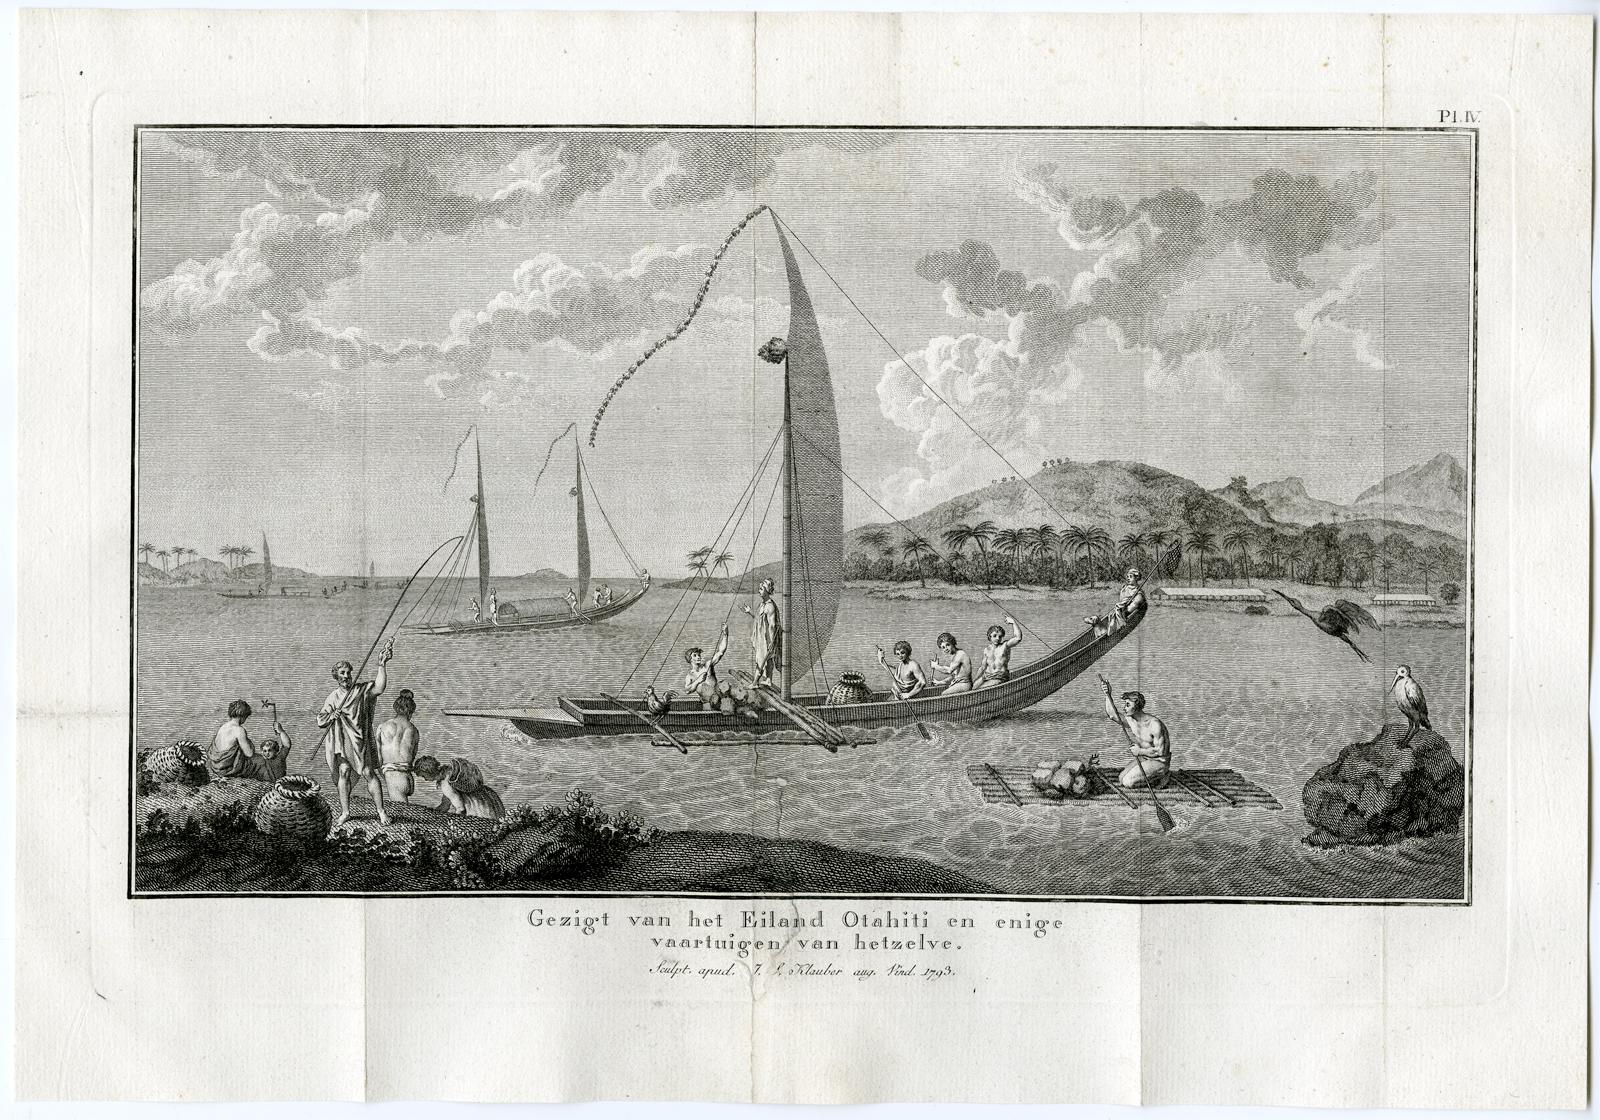 Subject: Antique print, titled: 'Pl. IV. Gezigt van het Eiland Otahiti en enige vaartuigen van hetzelve' - (View of the Island Tahiti and some vessels thereof.) An island in the archipelago of the Society Islands in the central Southern Pacific